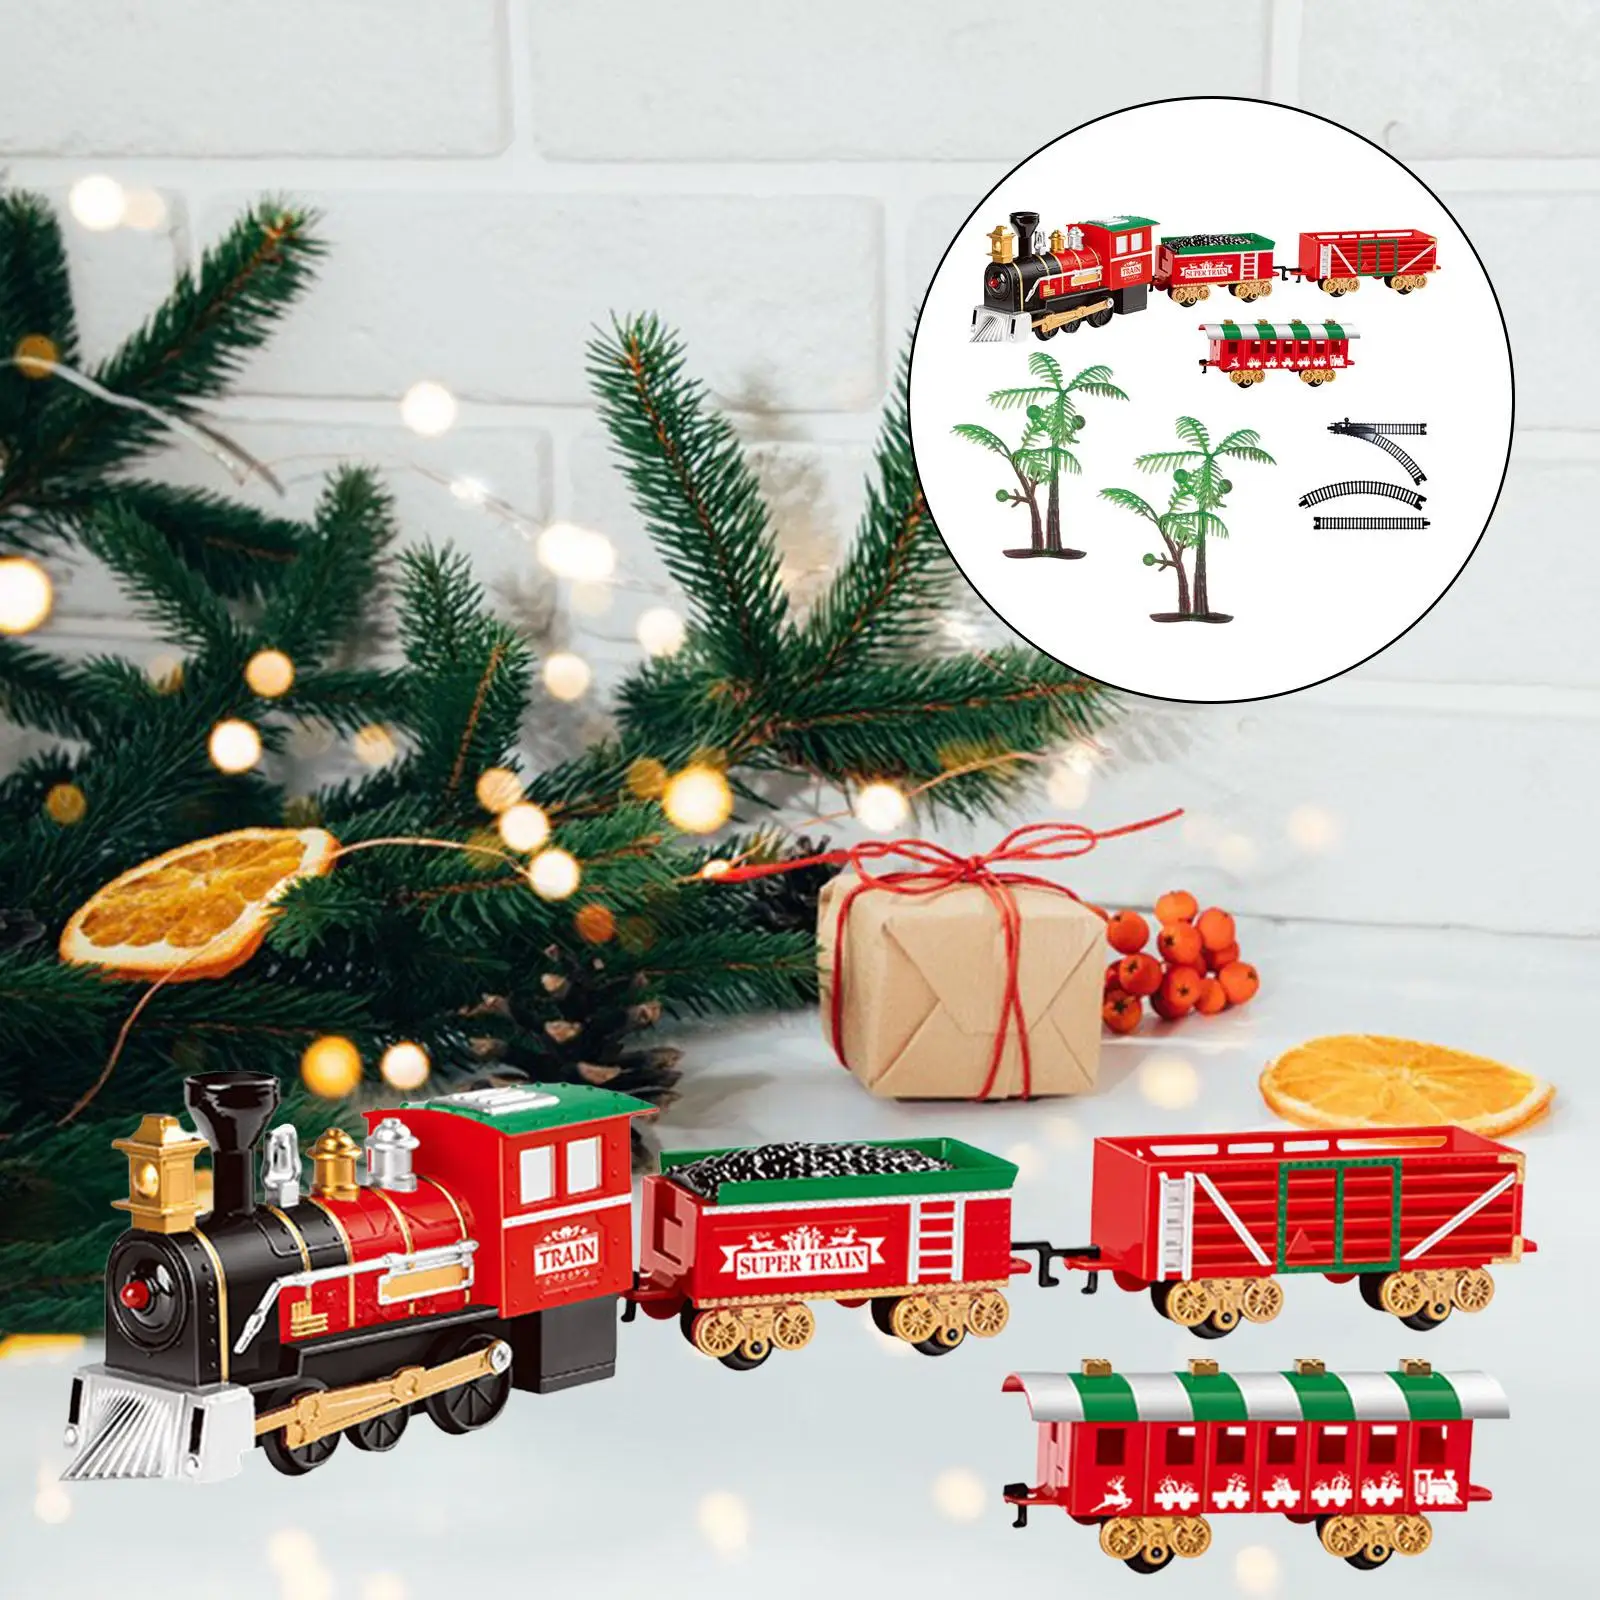 Portable Christmas Tree Train Set Educational Learning Toy Building Construction Set Railway Track Set for Girls Boys Kids